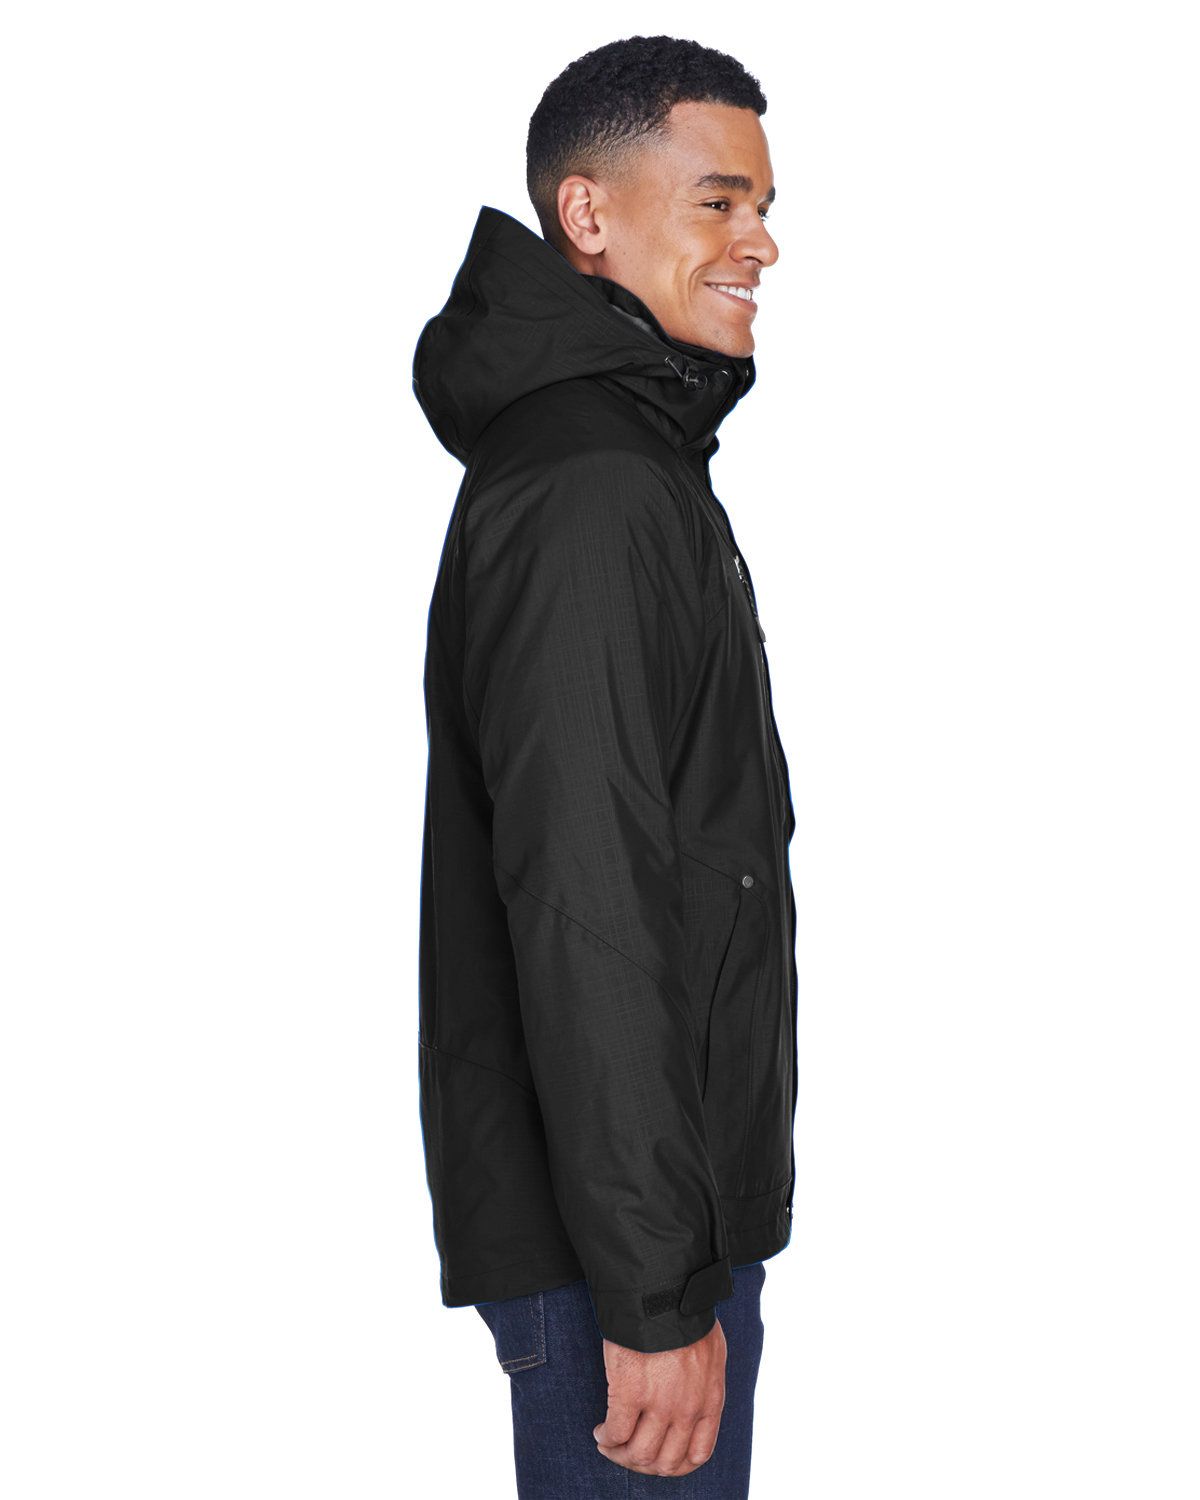 'Ash City - North End 88178 Men's Caprice 3-in-1 Jacket with Soft Shell Liner'